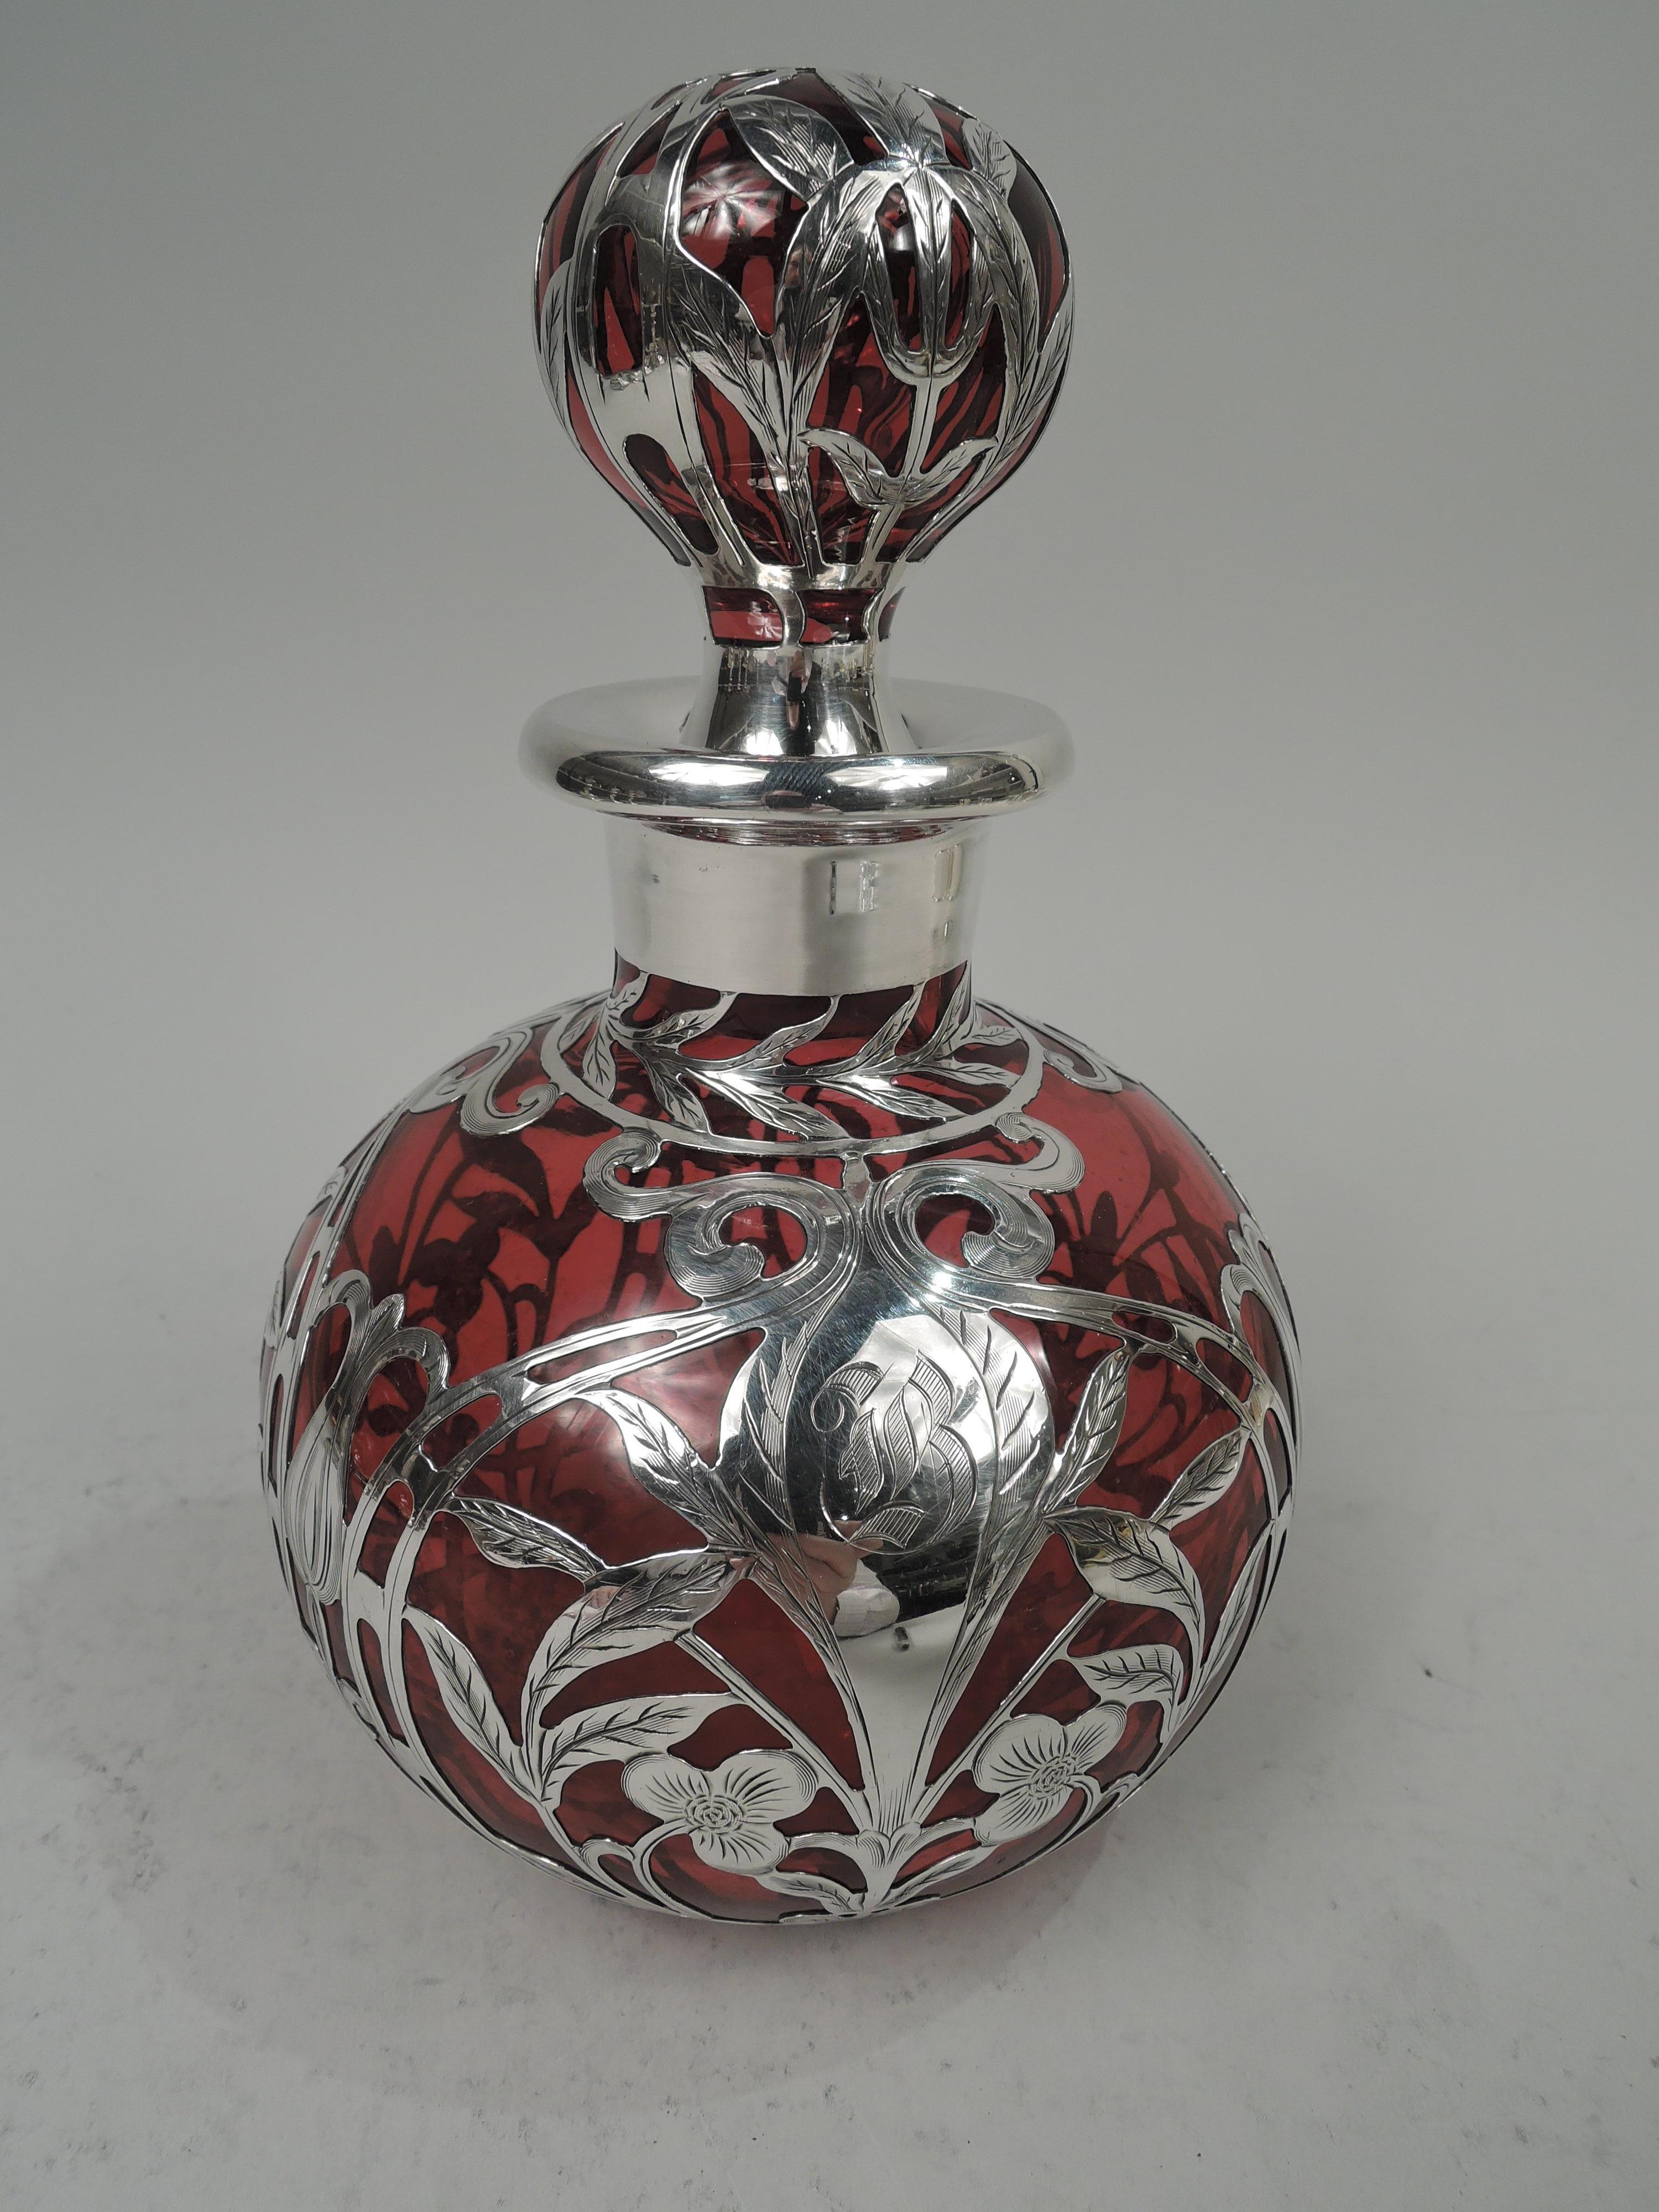 Large Art Nouveau glass cologne with engraved silver overlay. Made by Gorham in Providence, ca 1910. Globular with short neck and everted rim in silver collar. Ball stopper. Symmetrical overlay in fluid whiplash tendrils and stylized leaves and